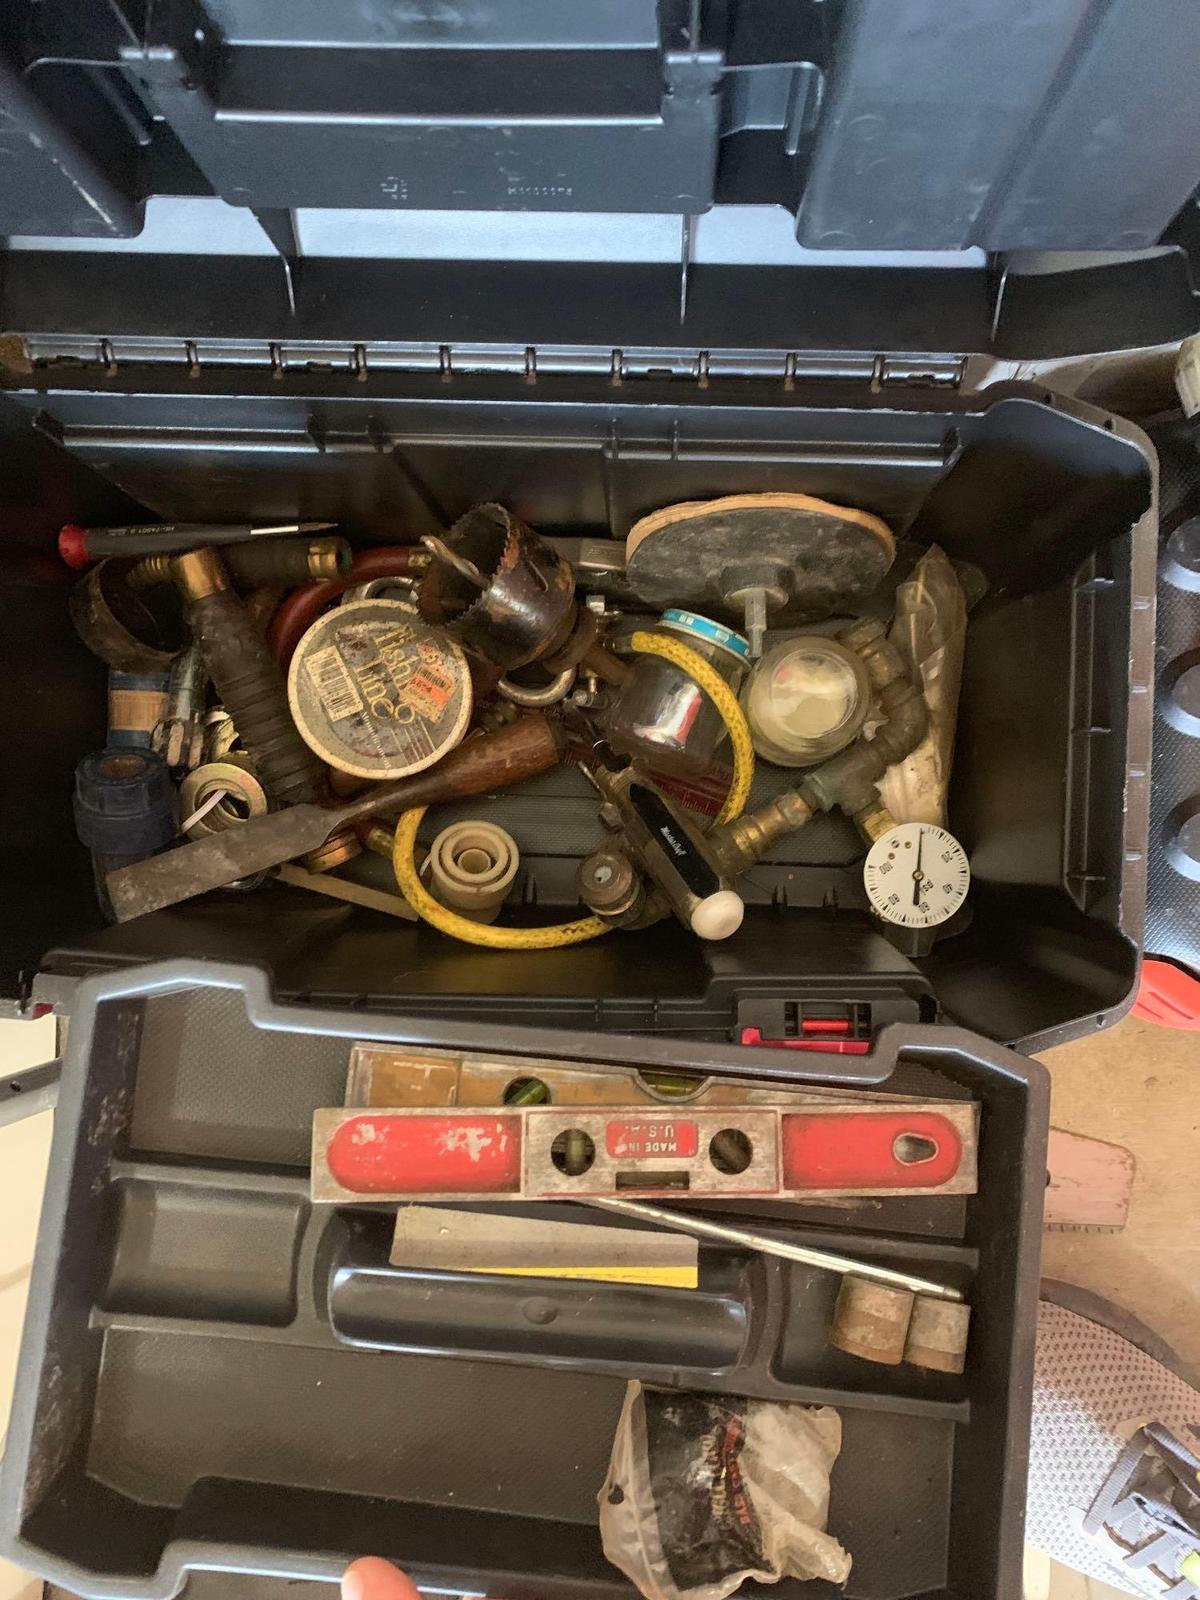 toolbox with assorted tools